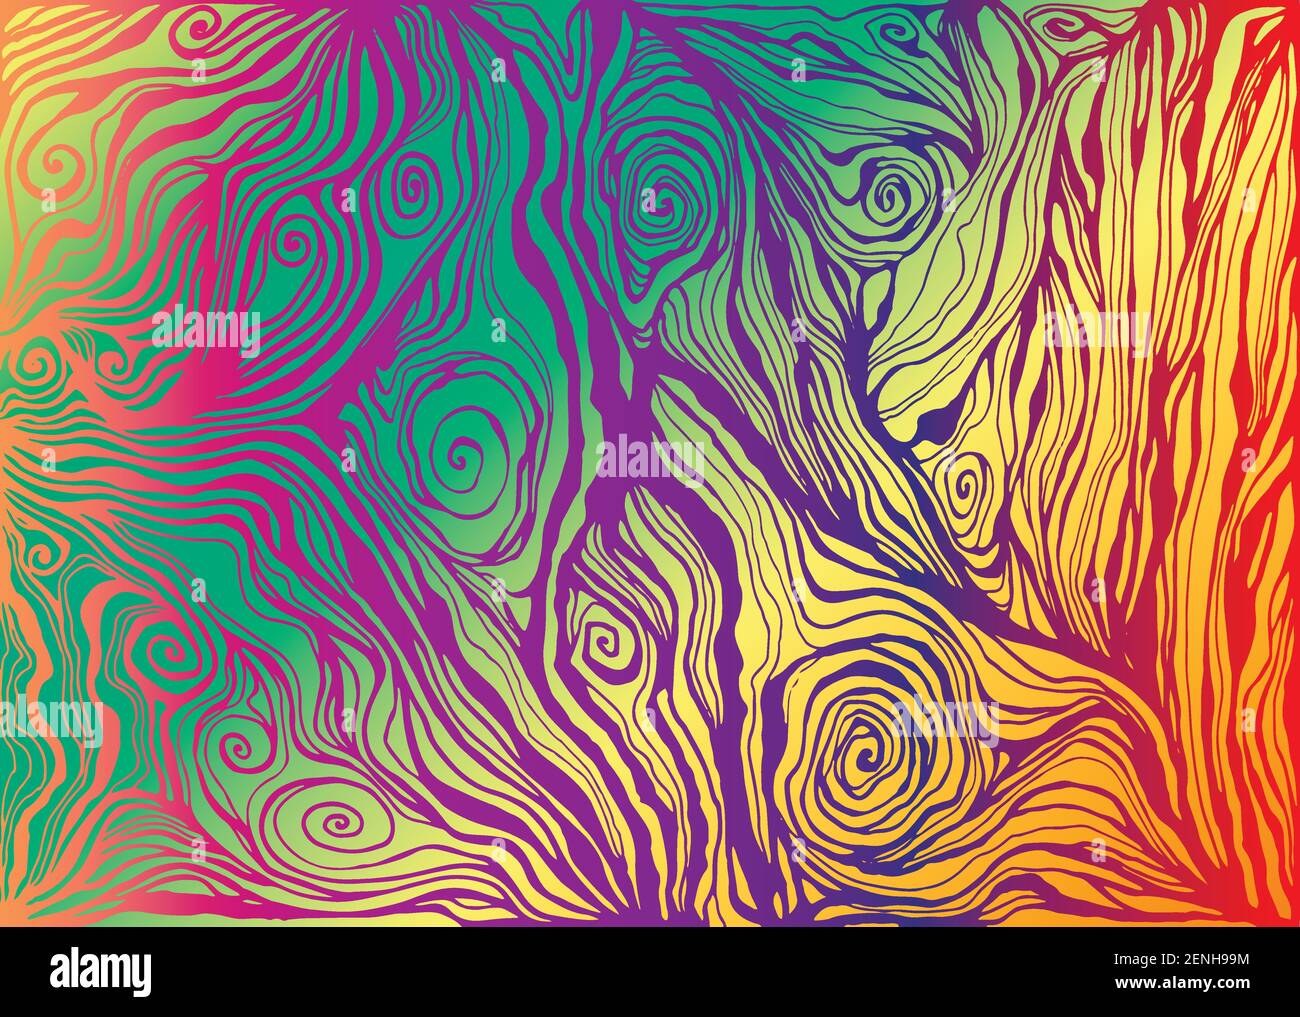 Psychedelic colorful art waves decorative texture. Vector hand drawn ...